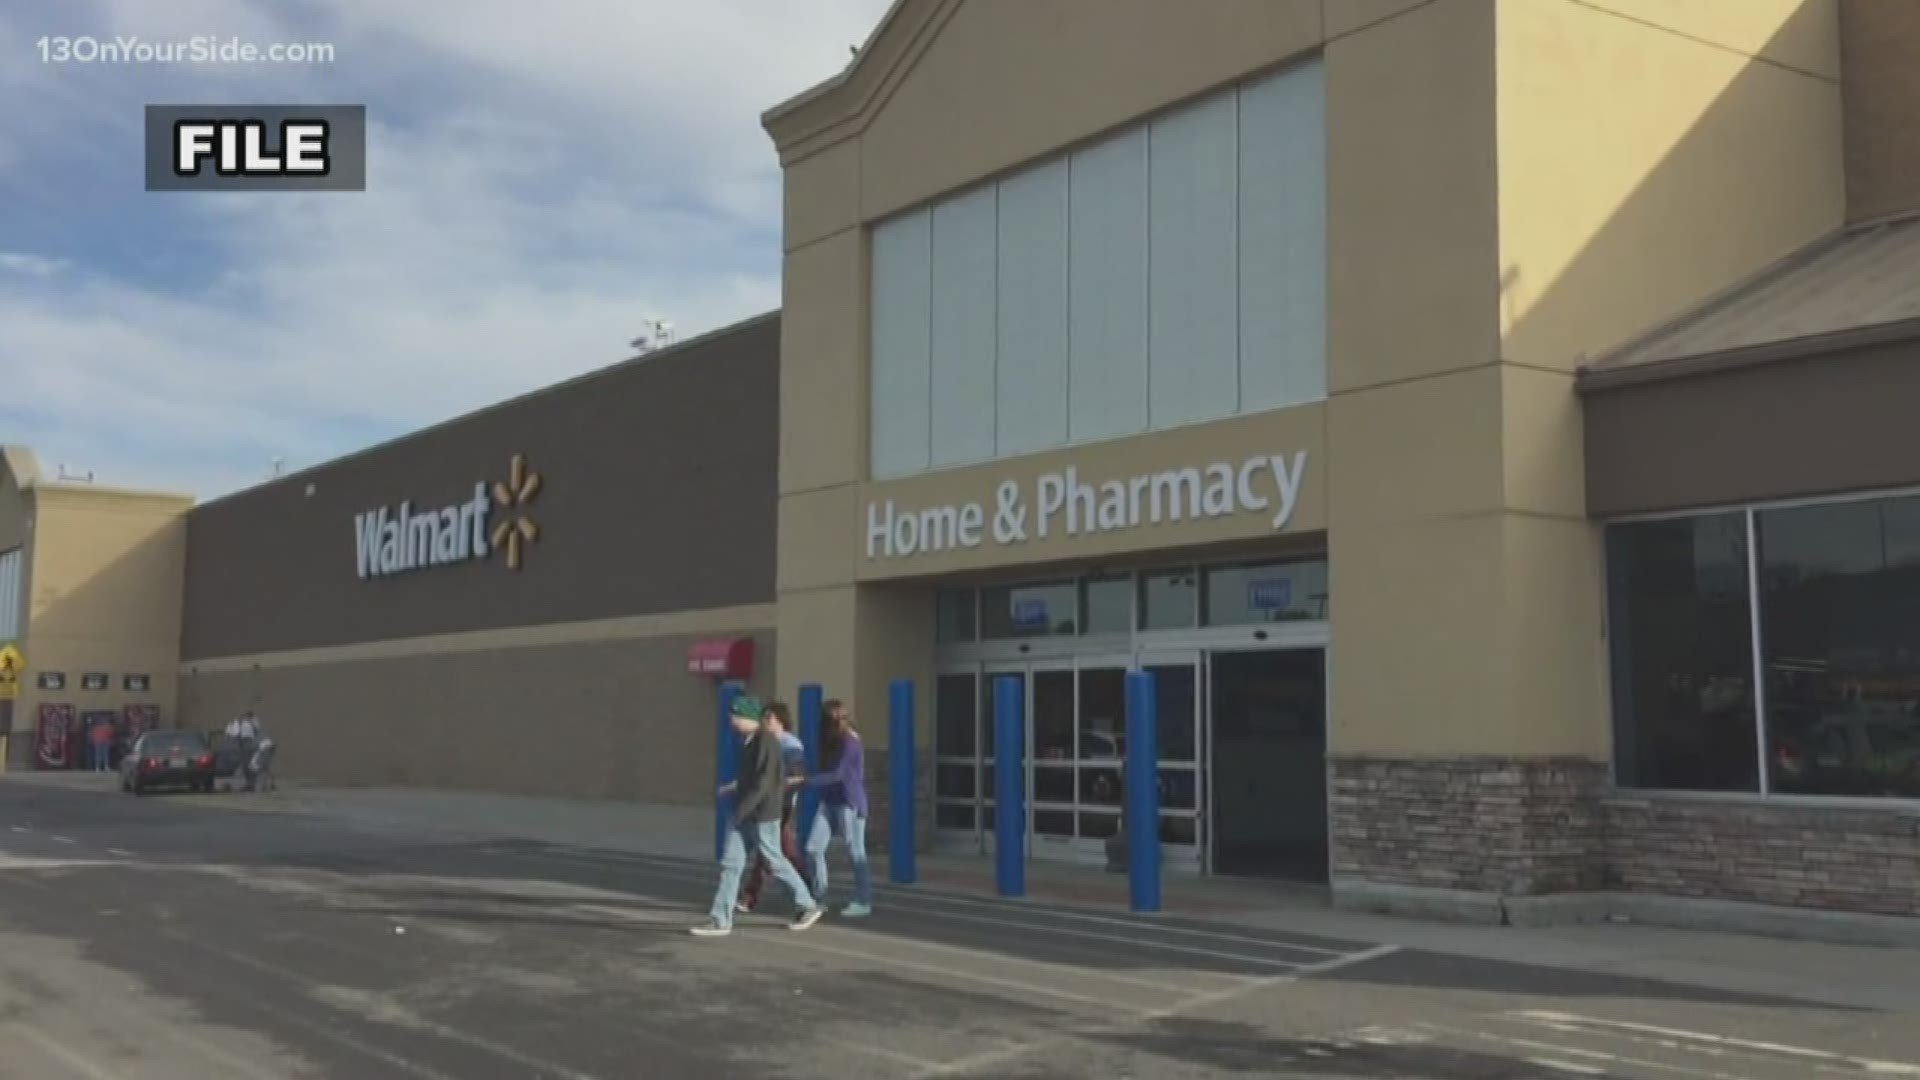 Starting Monday, July 1, you have to be 21 or older to purchase tobacco products from Walmart or Sam's Club. Walmart says the move is part of an effort to keep tobacco out of the hands of minors.